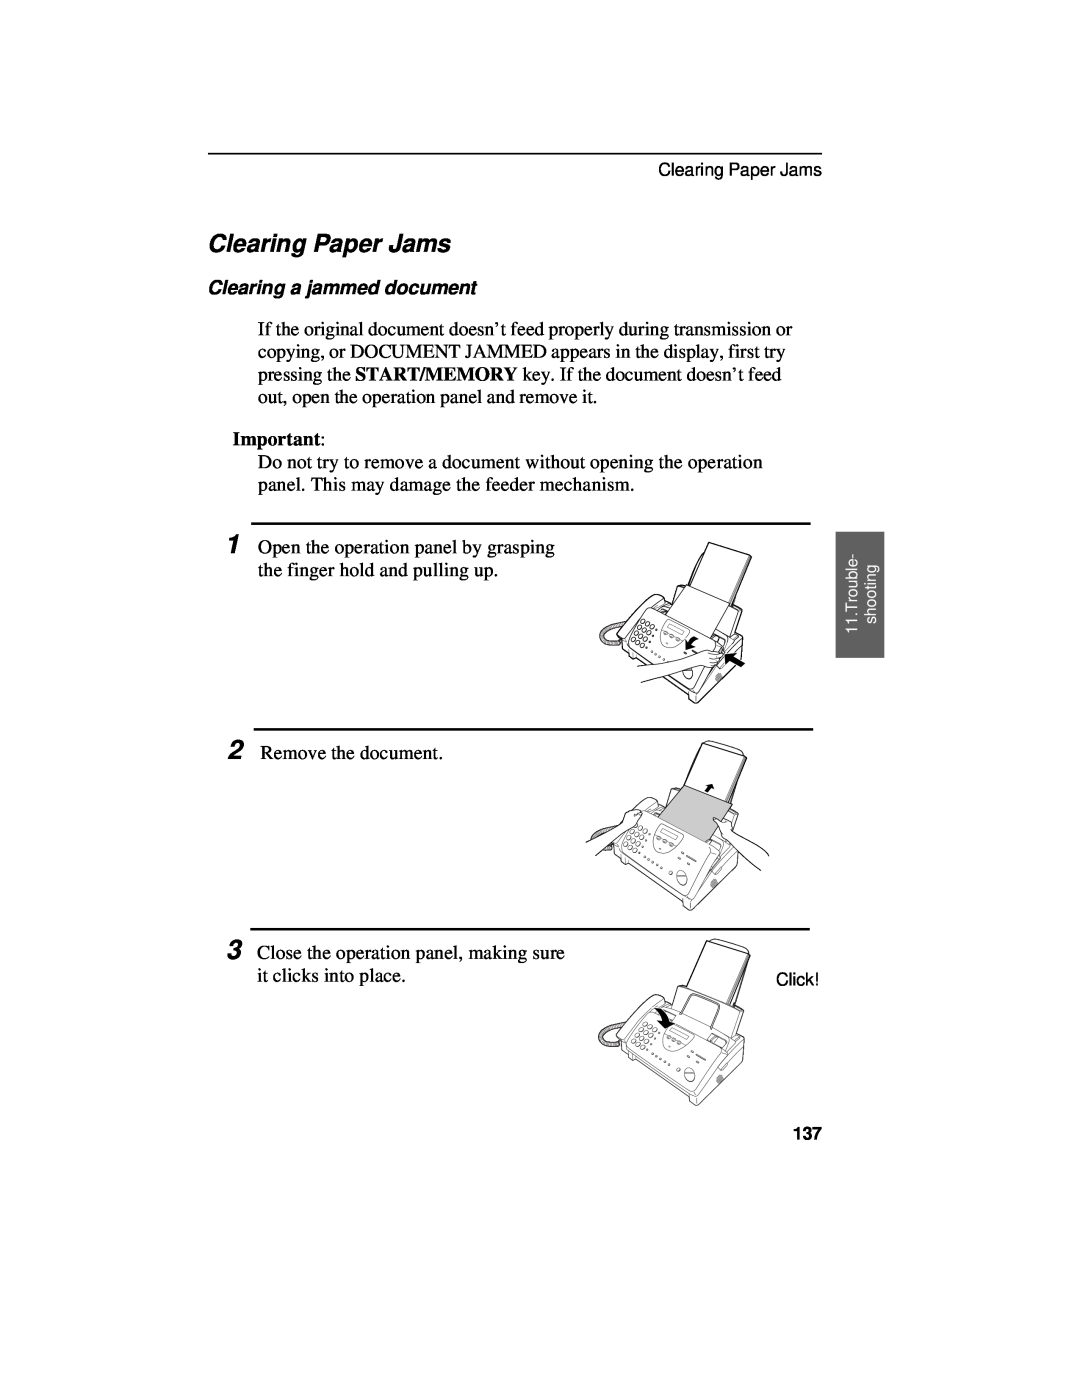 Sharp UX-460 operation manual Clearing Paper Jams, Clearing a jammed document 